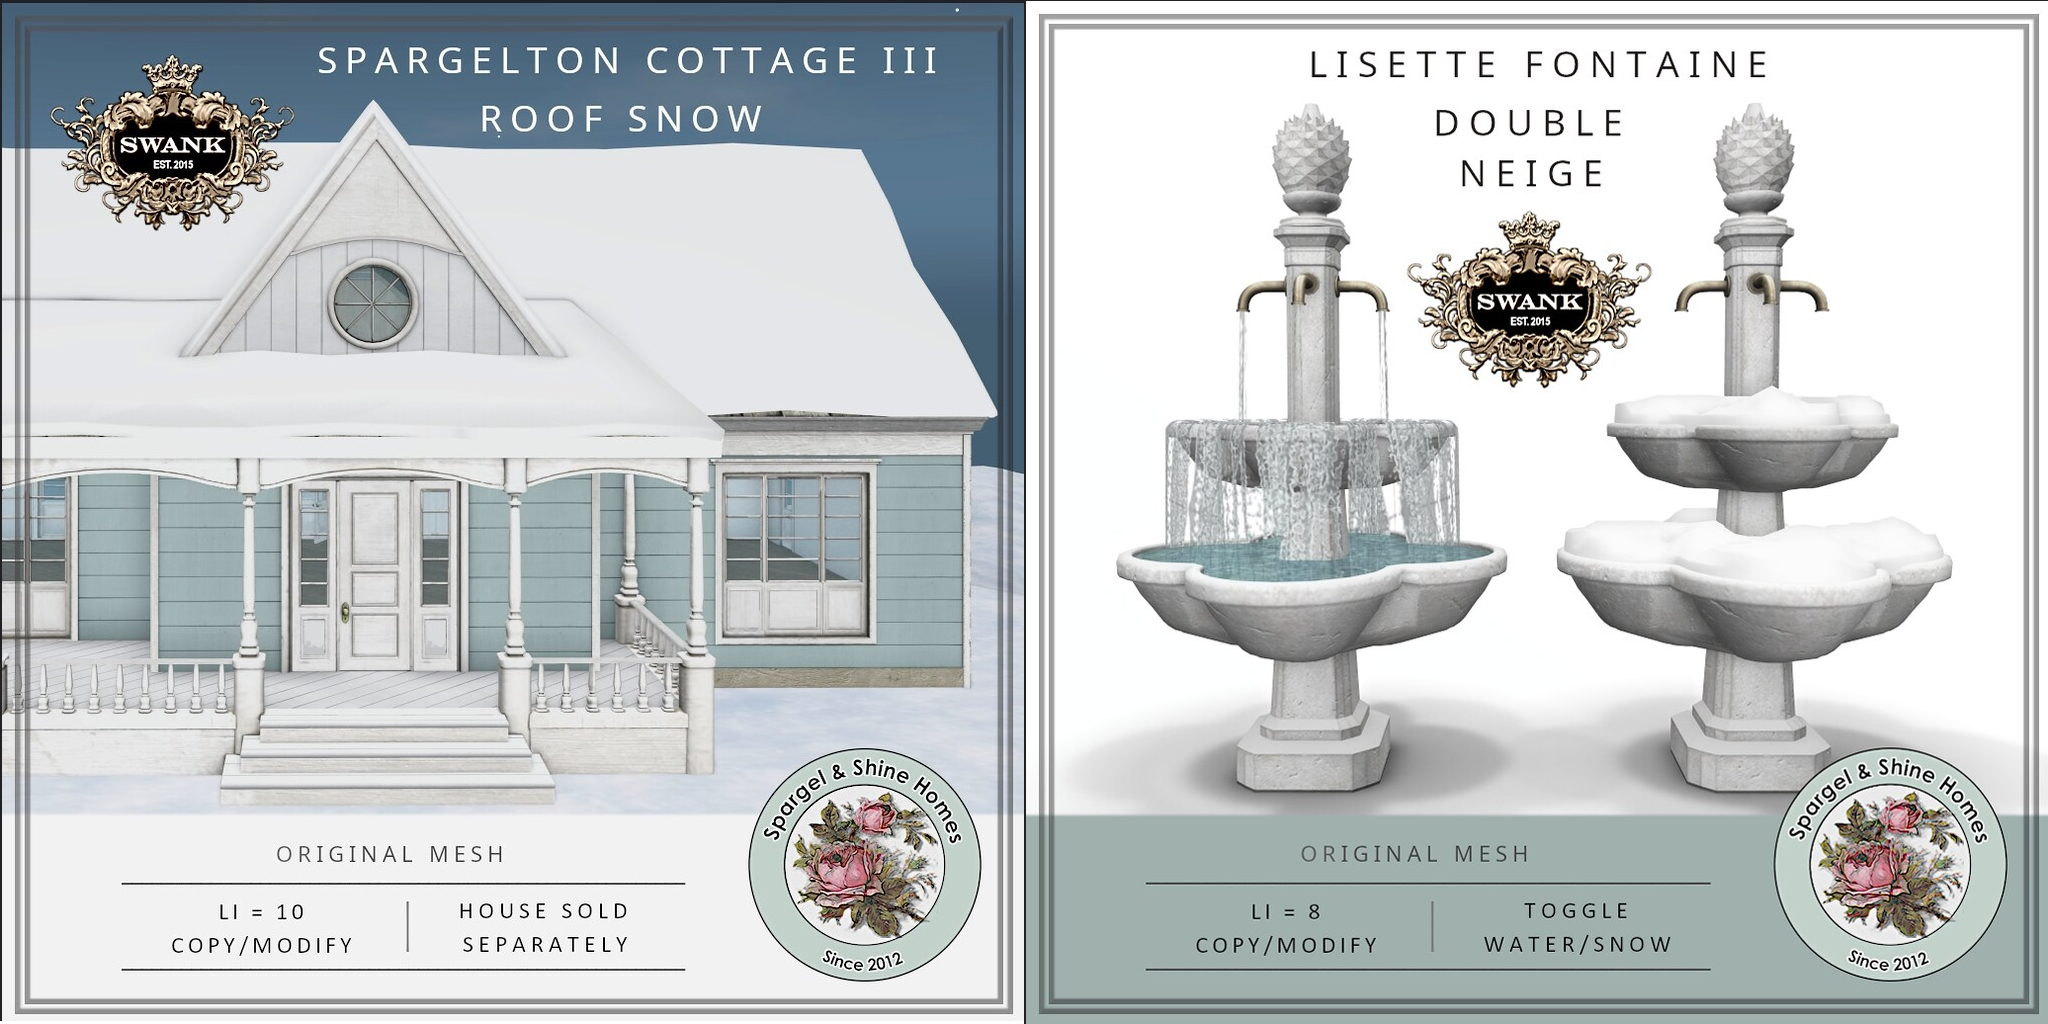 Spargel & Shine – Spargelton Cottage III Roof Snow & Lisette Fontaine Double Neige